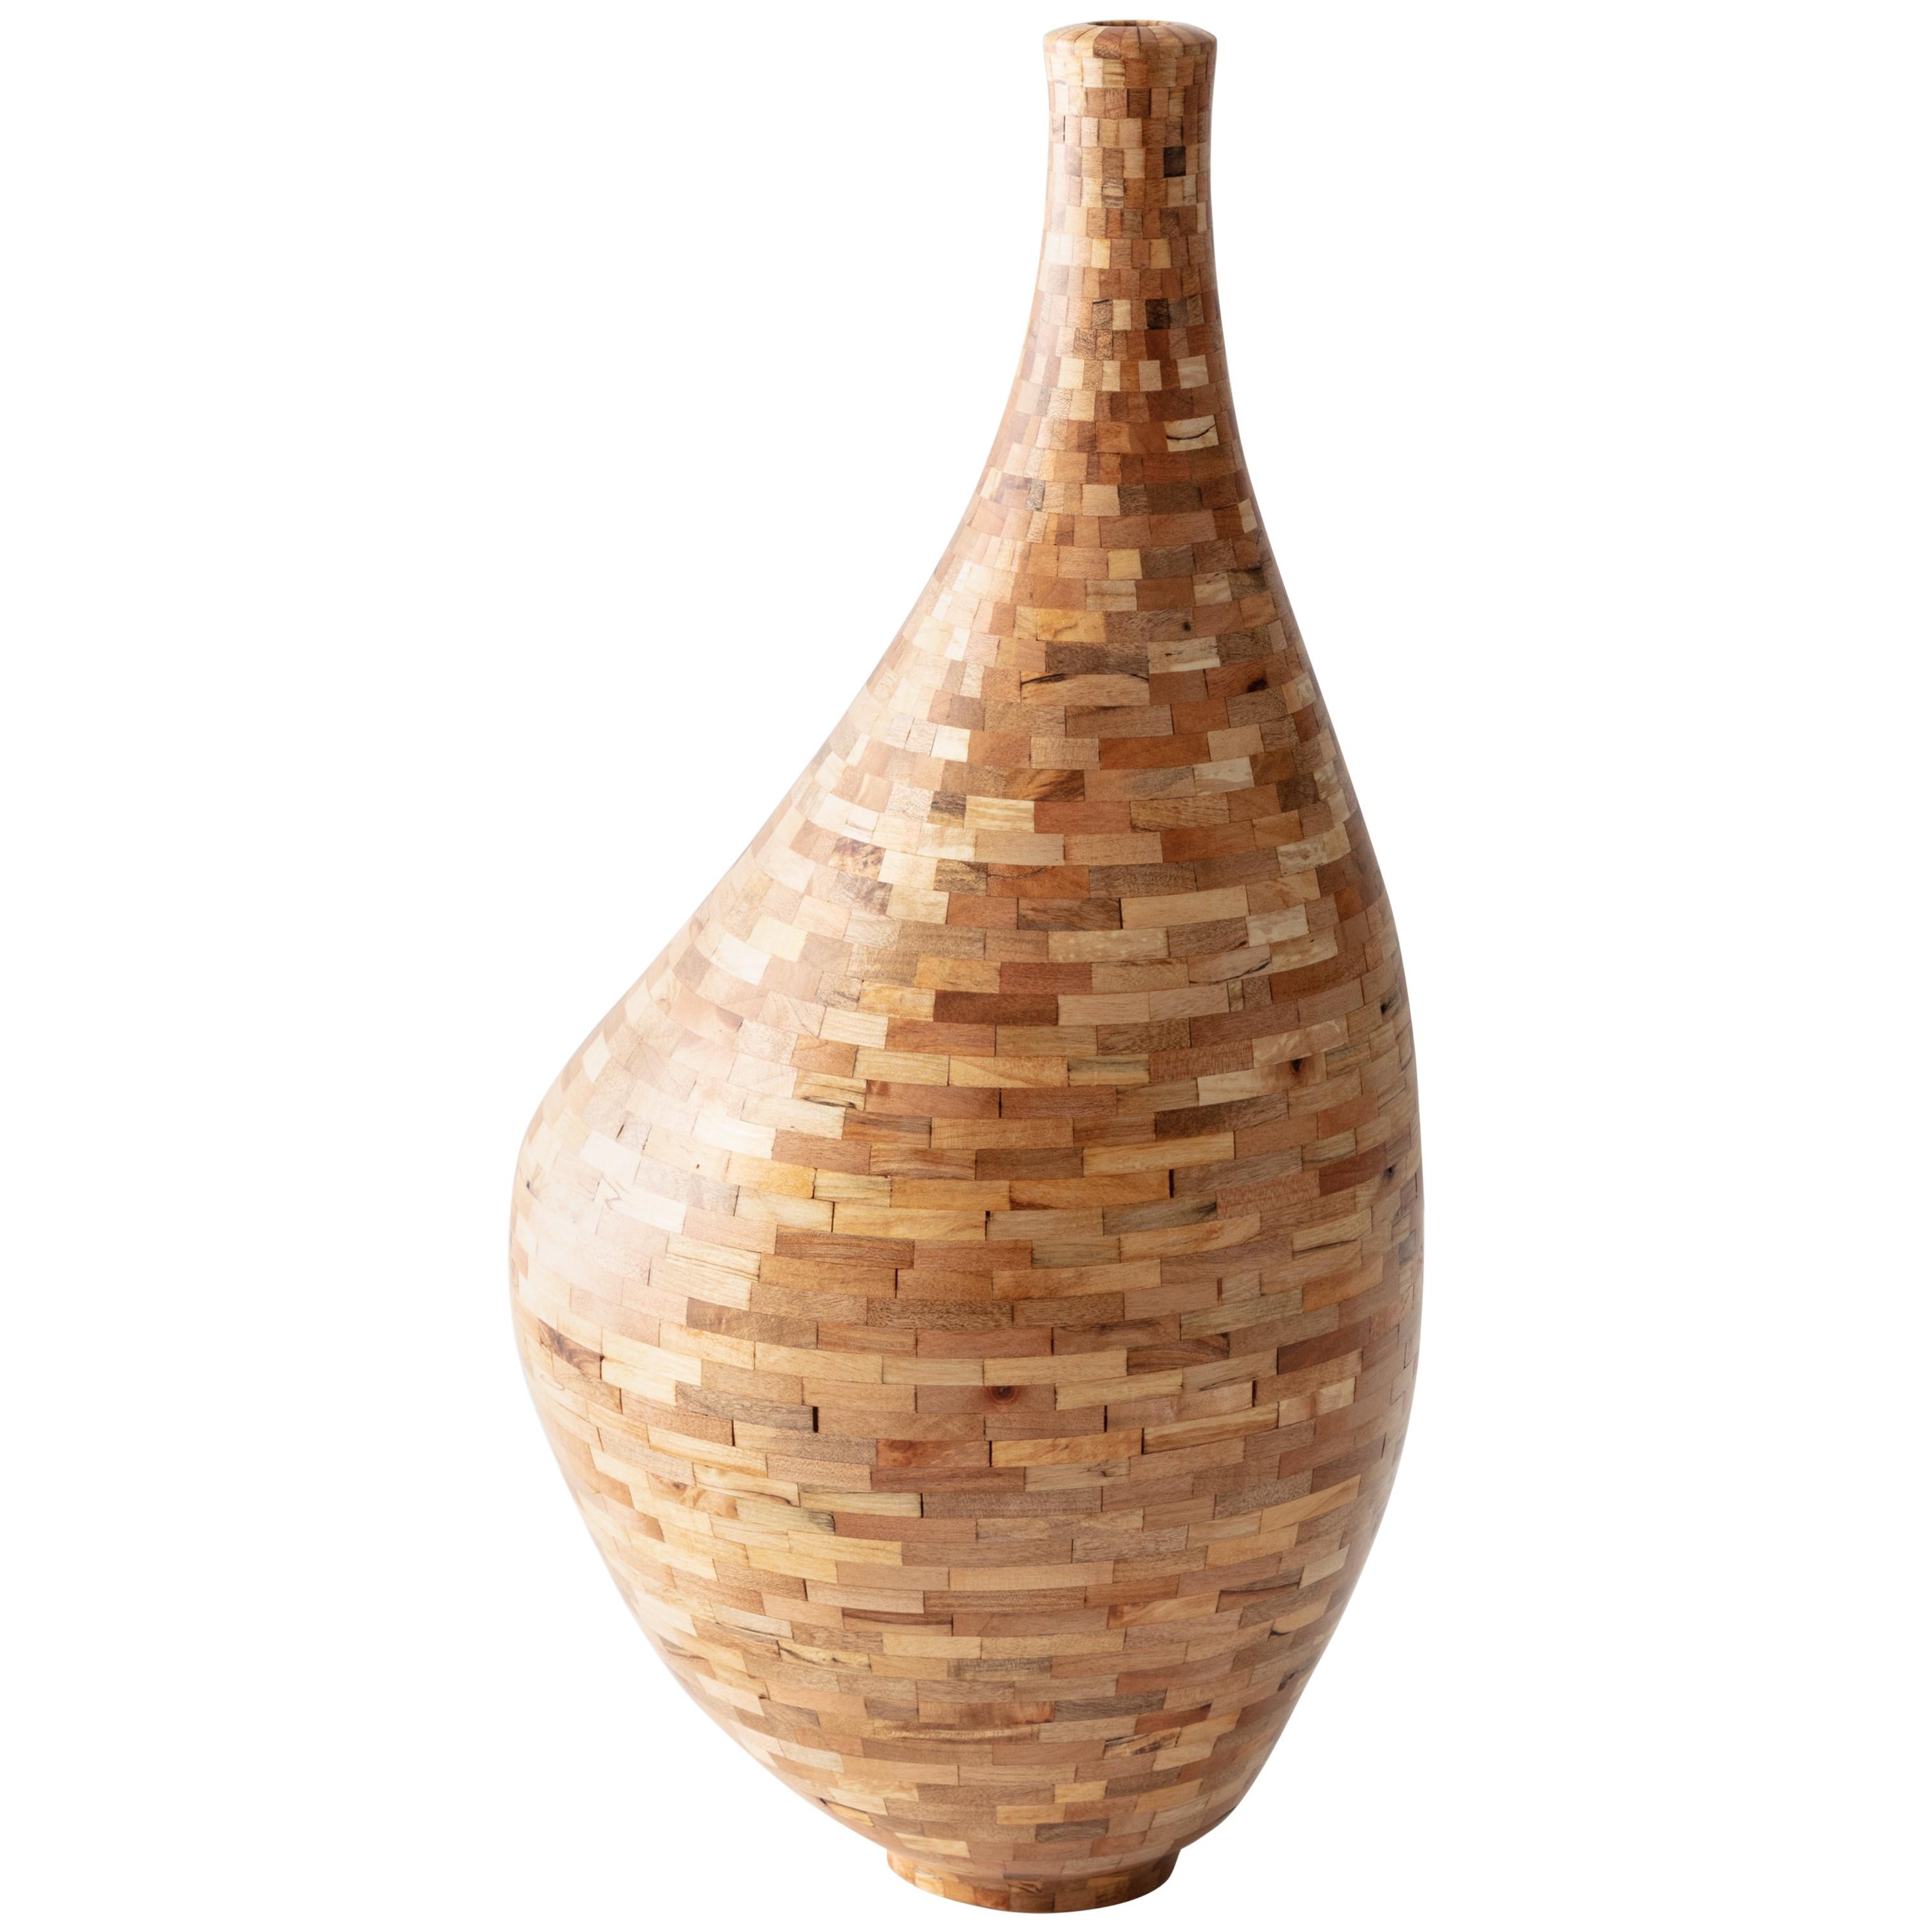 Contemporary Spalted Maple  Goose Neck Vase #2 by Richard Haining Available Now